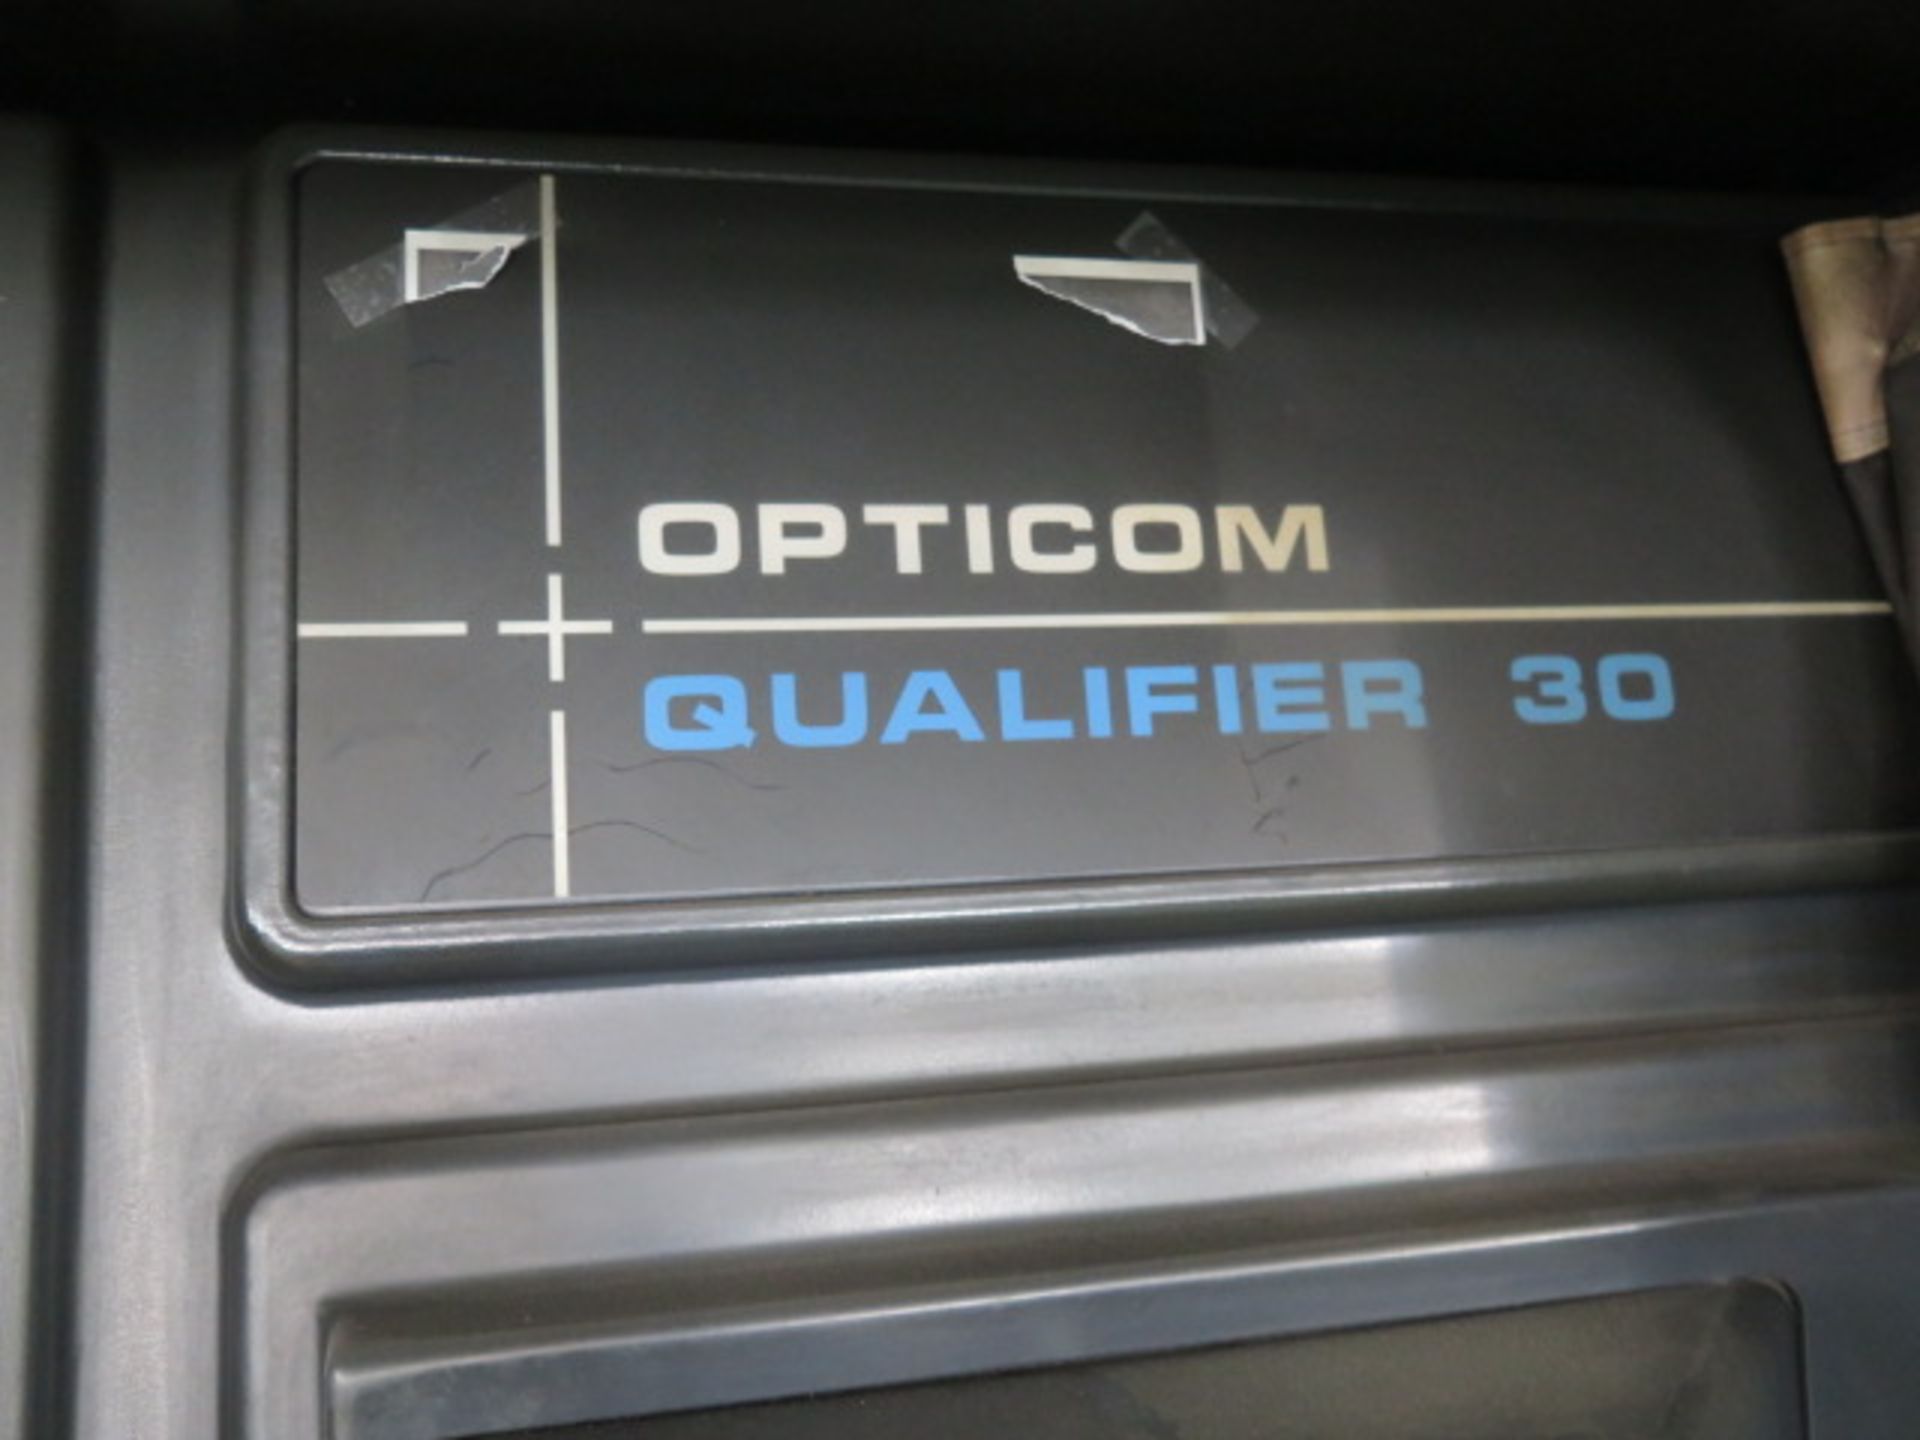 OGP Optical Gaging Co. “Opticon Qualifier 30” mdl. 0030S 30” Optical Comparator s/n 00300-340 w/ - Image 4 of 13